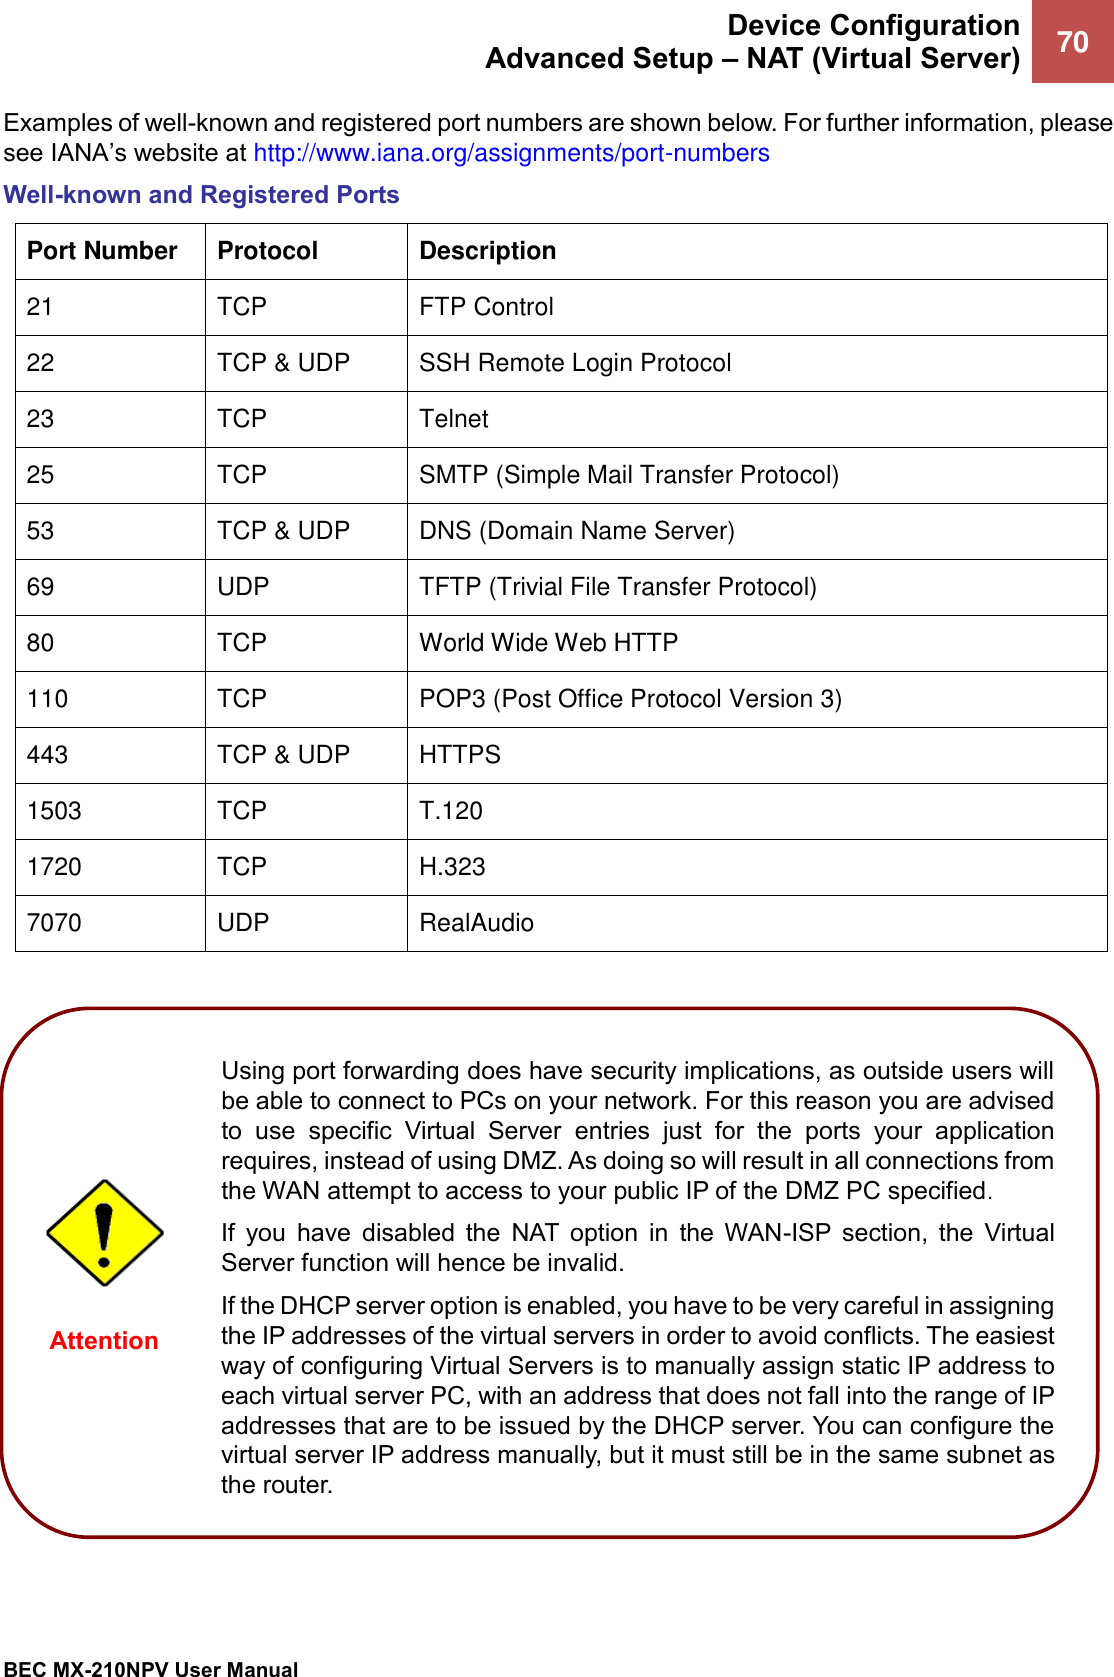  Device Configuration Advanced Setup – NAT (Virtual Server) 70   BEC MX-210NPV User Manual  Examples of well-known and registered port numbers are shown below. For further information, please see IANA’s website at http://www.iana.org/assignments/port-numbers Well-known and Registered Ports Port Number Protocol Description 21 TCP FTP Control 22 TCP &amp; UDP SSH Remote Login Protocol 23 TCP Telnet 25 TCP SMTP (Simple Mail Transfer Protocol) 53 TCP &amp; UDP DNS (Domain Name Server) 69 UDP TFTP (Trivial File Transfer Protocol) 80 TCP World Wide Web HTTP 110 TCP POP3 (Post Office Protocol Version 3) 443 TCP &amp; UDP HTTPS 1503 TCP T.120 1720 TCP H.323 7070 UDP RealAudio   Using port forwarding does have security implications, as outside users will be able to connect to PCs on your network. For this reason you are advised to  use  specific  Virtual  Server  entries  just  for  the  ports  your  application requires, instead of using DMZ. As doing so will result in all connections from the WAN attempt to access to your public IP of the DMZ PC specified. If  you  have  disabled  the  NAT  option  in  the  WAN-ISP  section,  the  Virtual Server function will hence be invalid. If the DHCP server option is enabled, you have to be very careful in assigning the IP addresses of the virtual servers in order to avoid conflicts. The easiest way of configuring Virtual Servers is to manually assign static IP address to each virtual server PC, with an address that does not fall into the range of IP addresses that are to be issued by the DHCP server. You can configure the virtual server IP address manually, but it must still be in the same subnet as the router. Attention 